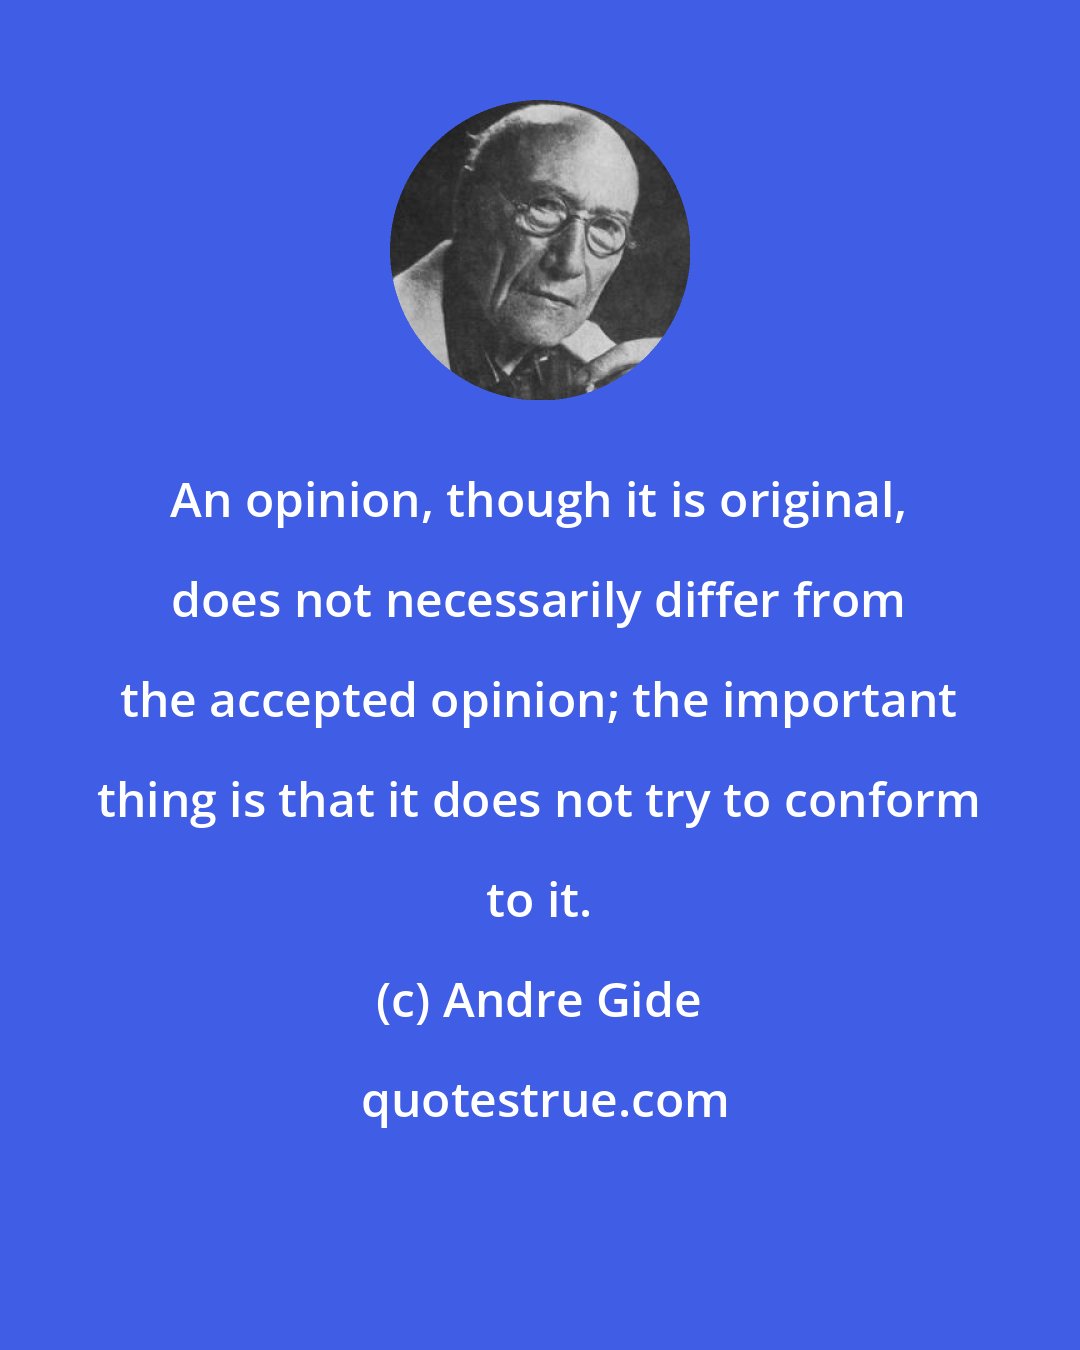 Andre Gide: An opinion, though it is original, does not necessarily differ from the accepted opinion; the important thing is that it does not try to conform to it.